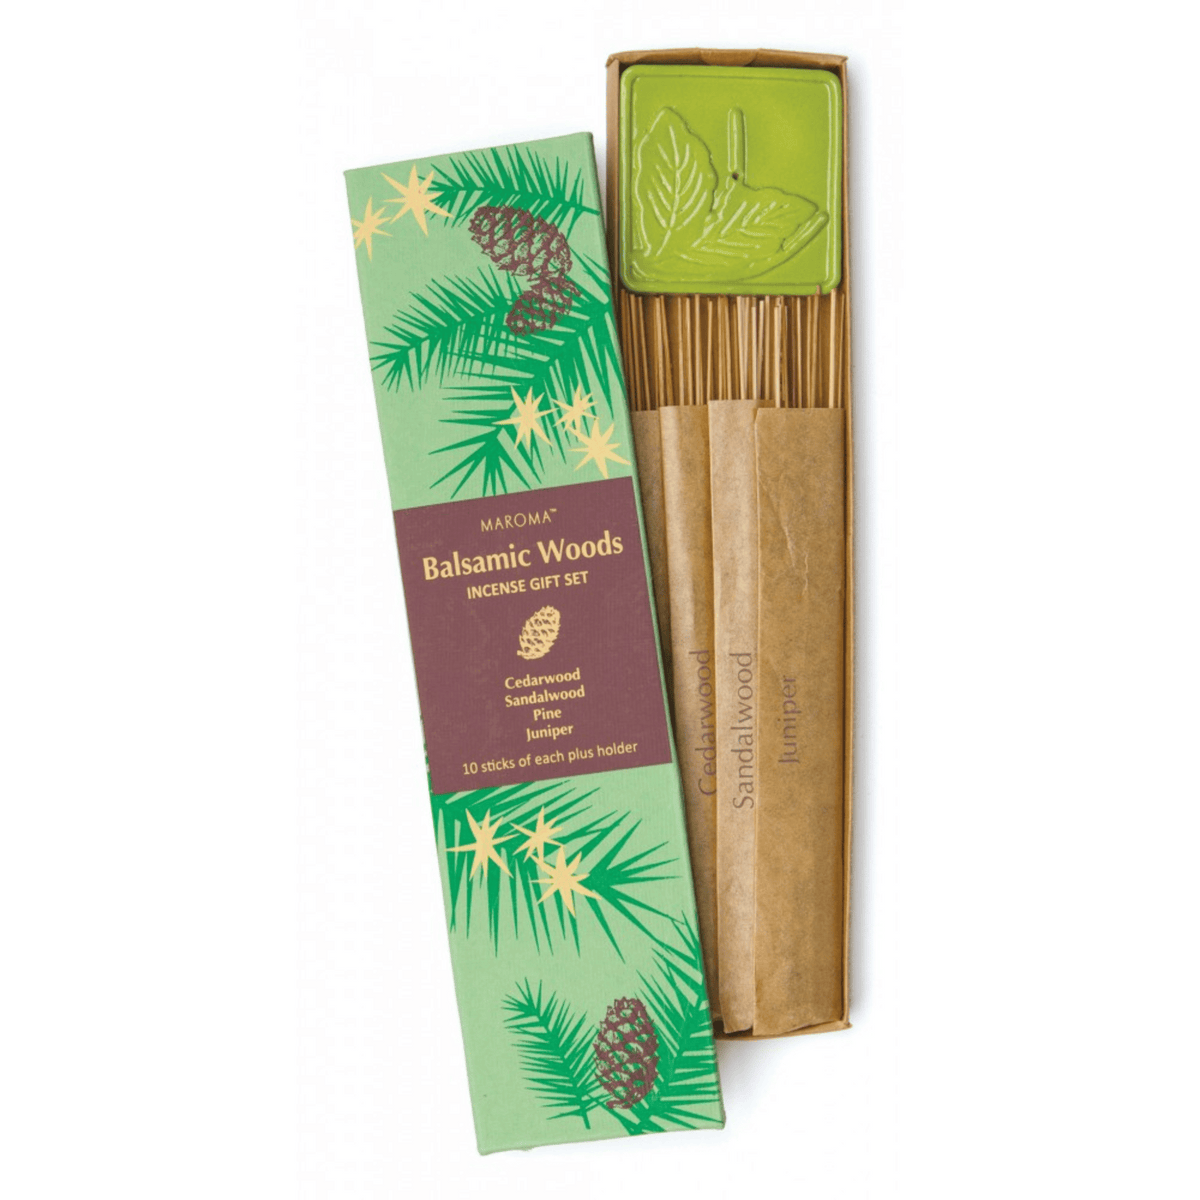 Primary Image of Balsamic Woods Incense Collection with Holder